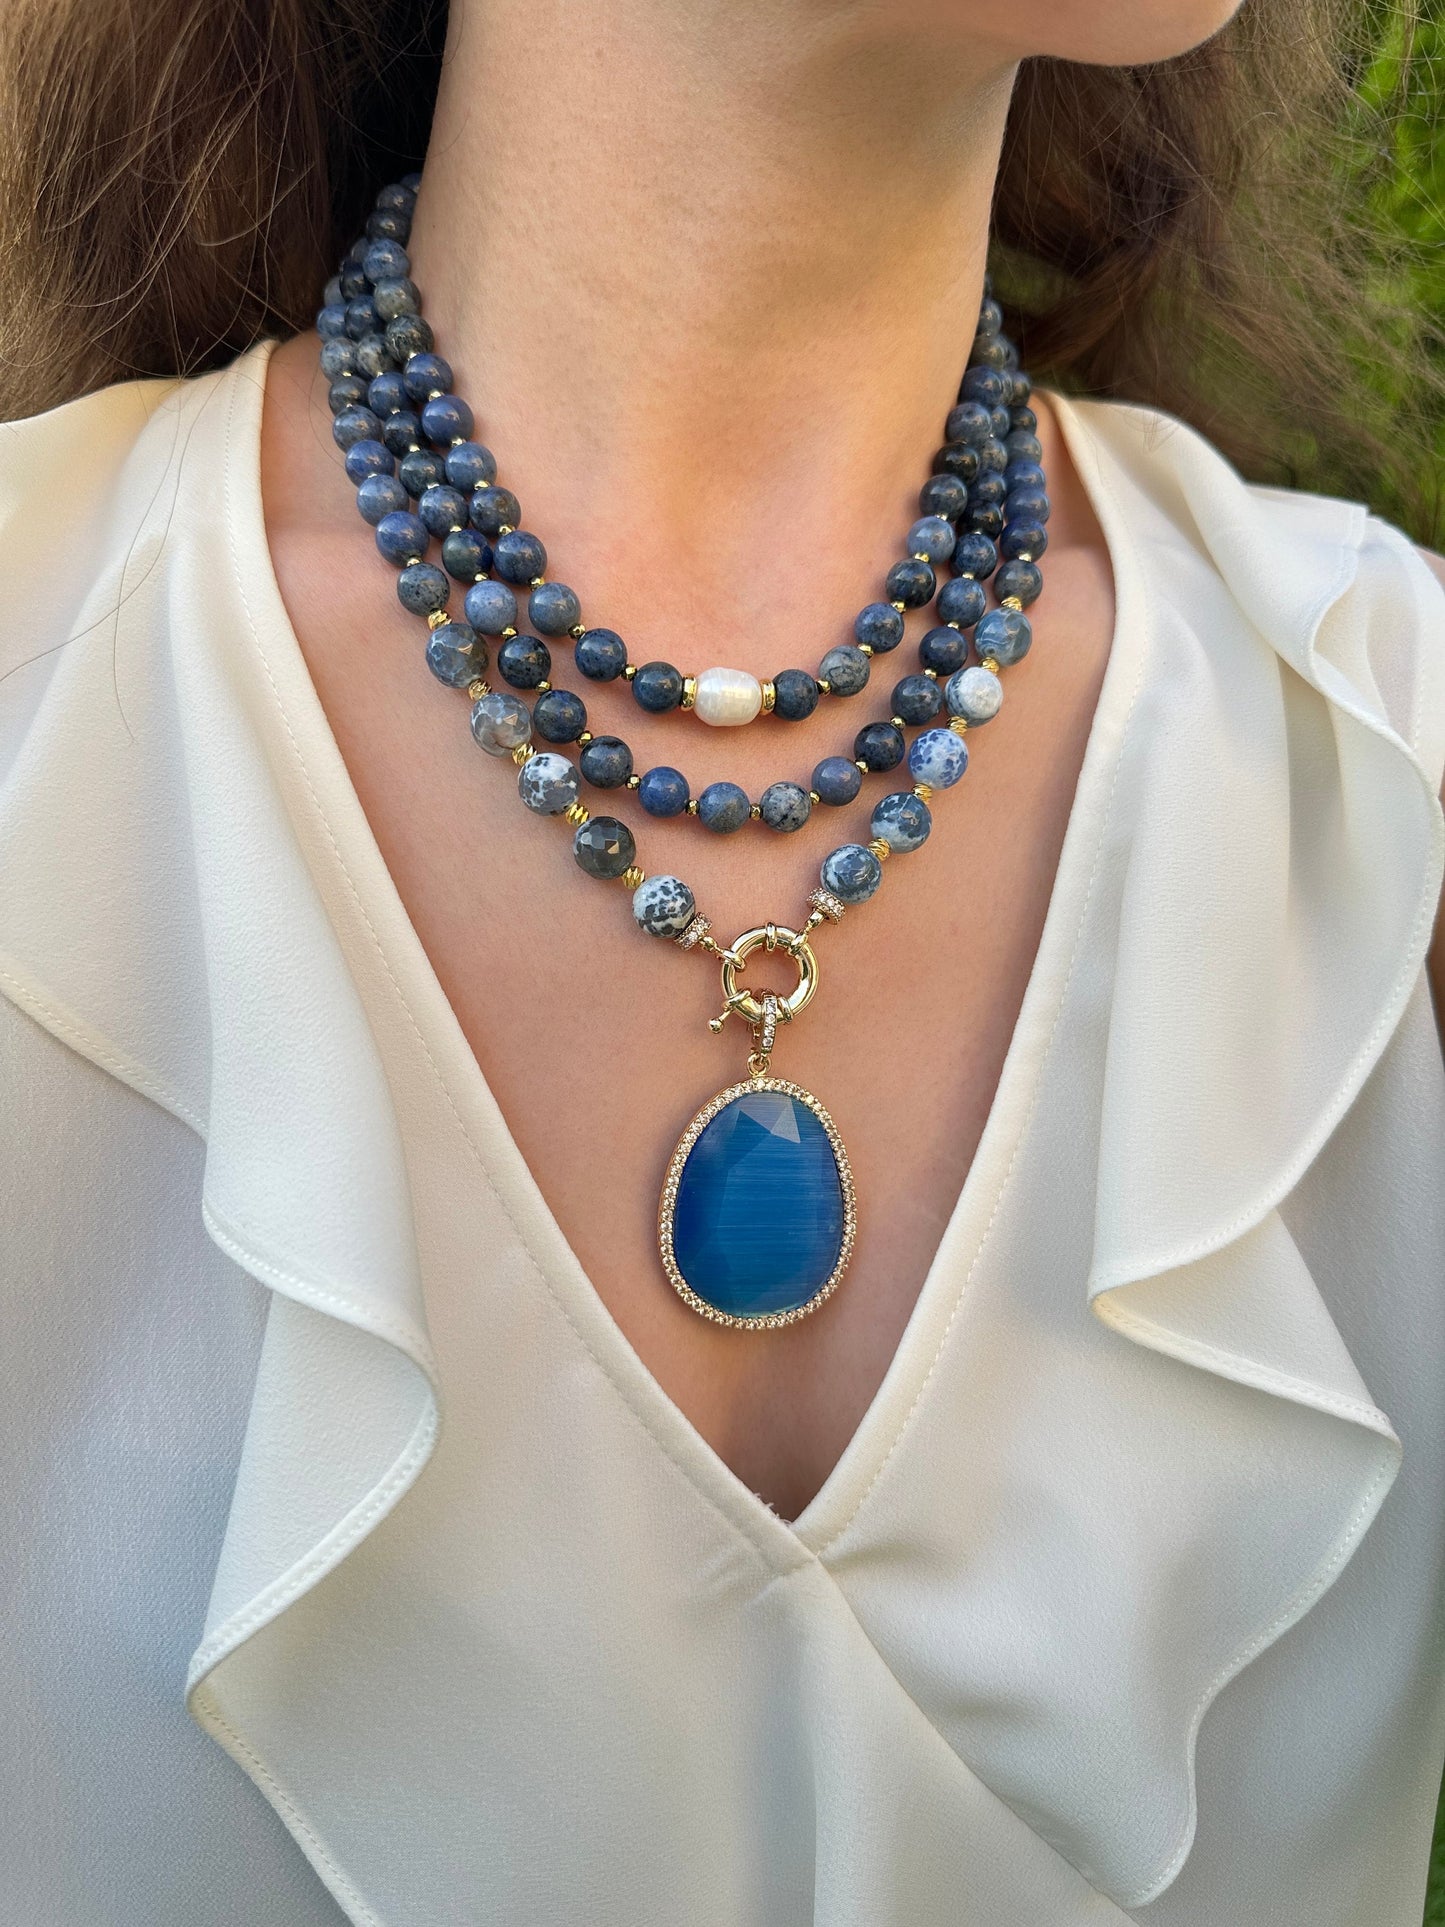 Sodalite and Agate Necklace, Multi Strand Gemstone Jewelry, Anniversary Gift, Summer Jewelry, Deep Blue Birthday Gift